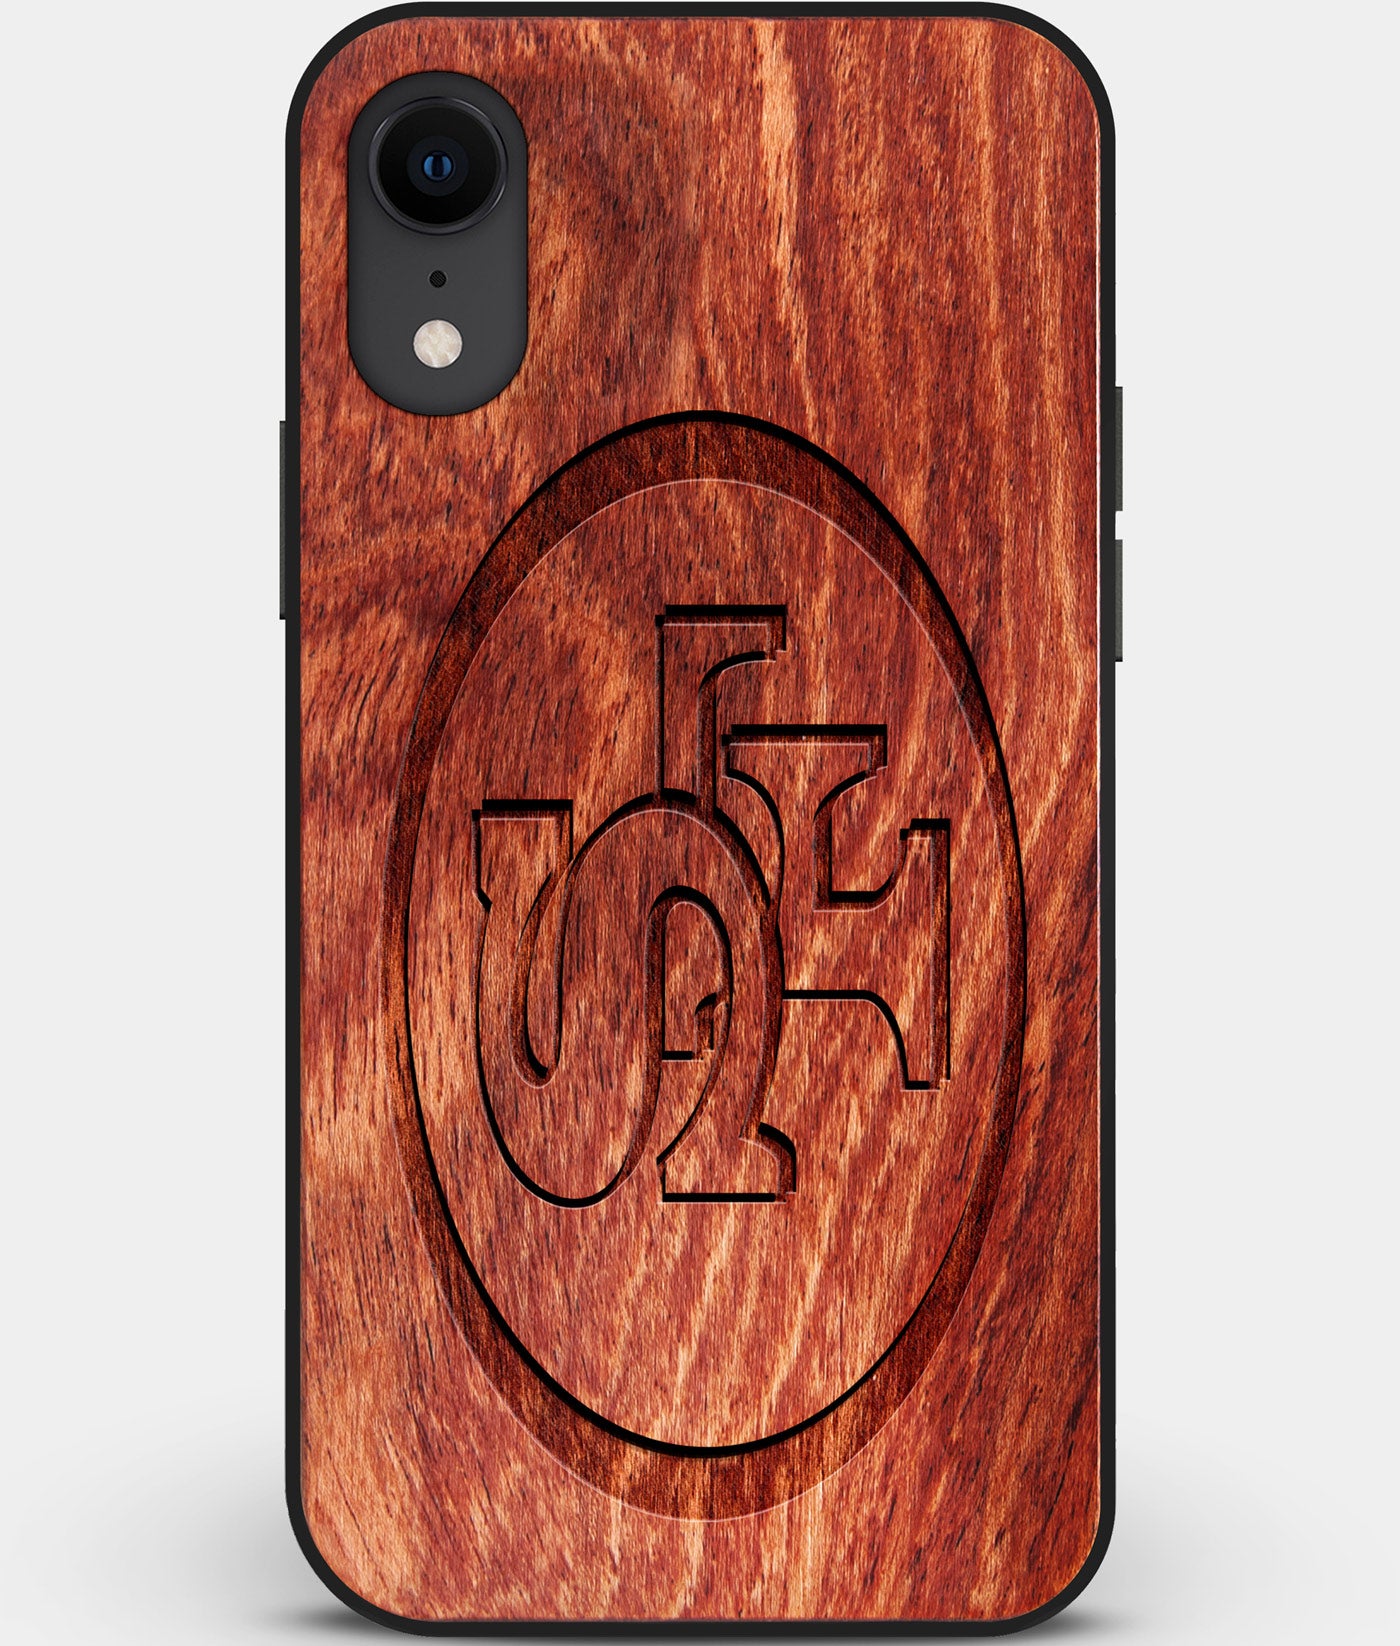 Custom Carved Wood San Francisco 49ers iPhone XR Case | Personalized Mahogany Wood San Francisco 49ers Cover, Birthday Gift, Gifts For Him, Monogrammed Gift For Fan | by Engraved In Nature